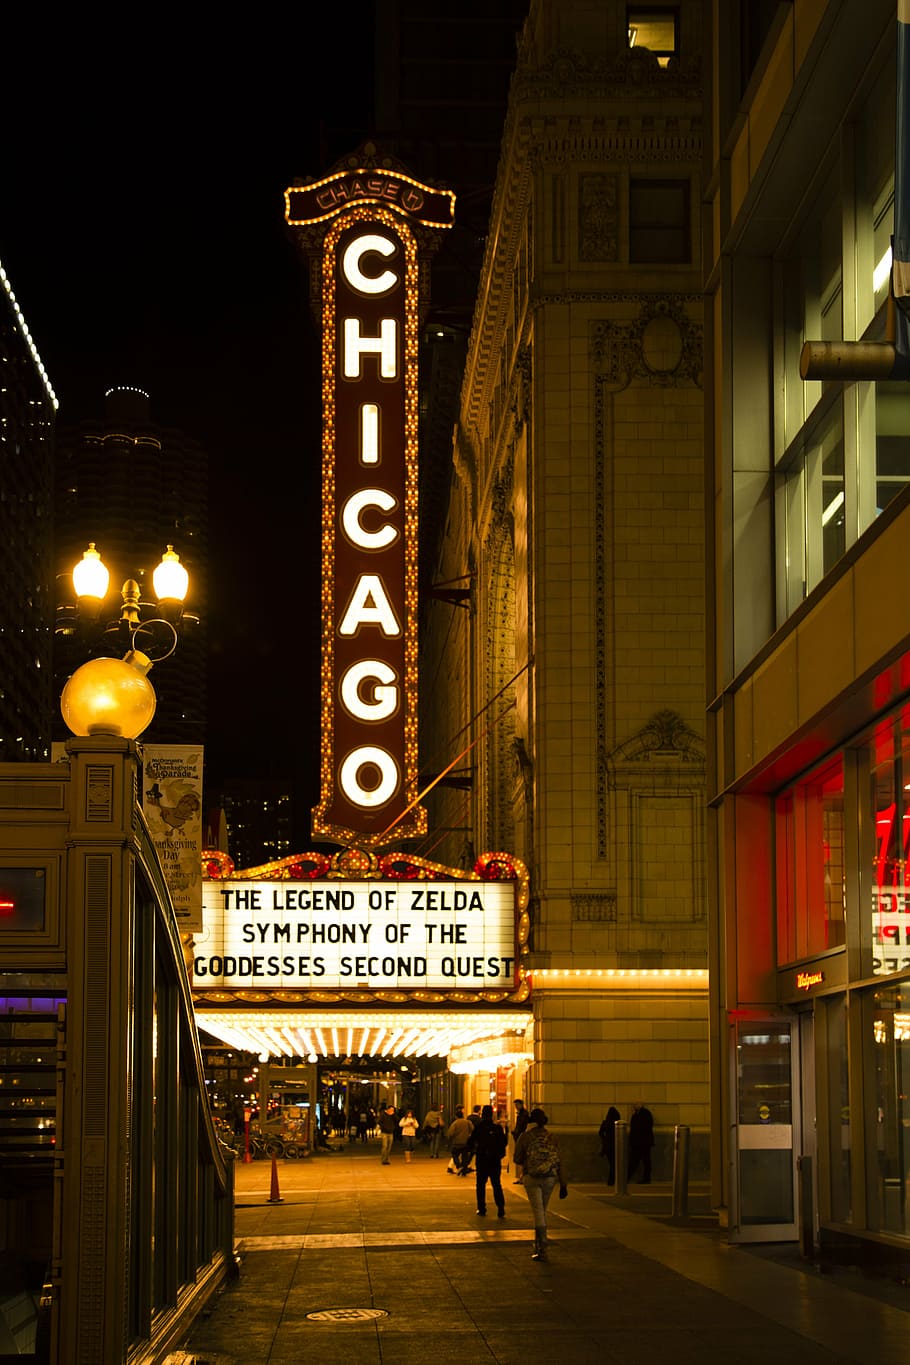 chicago signage, chicago theater, downtown, night, lights, sign, street, text, architecture, illuminated